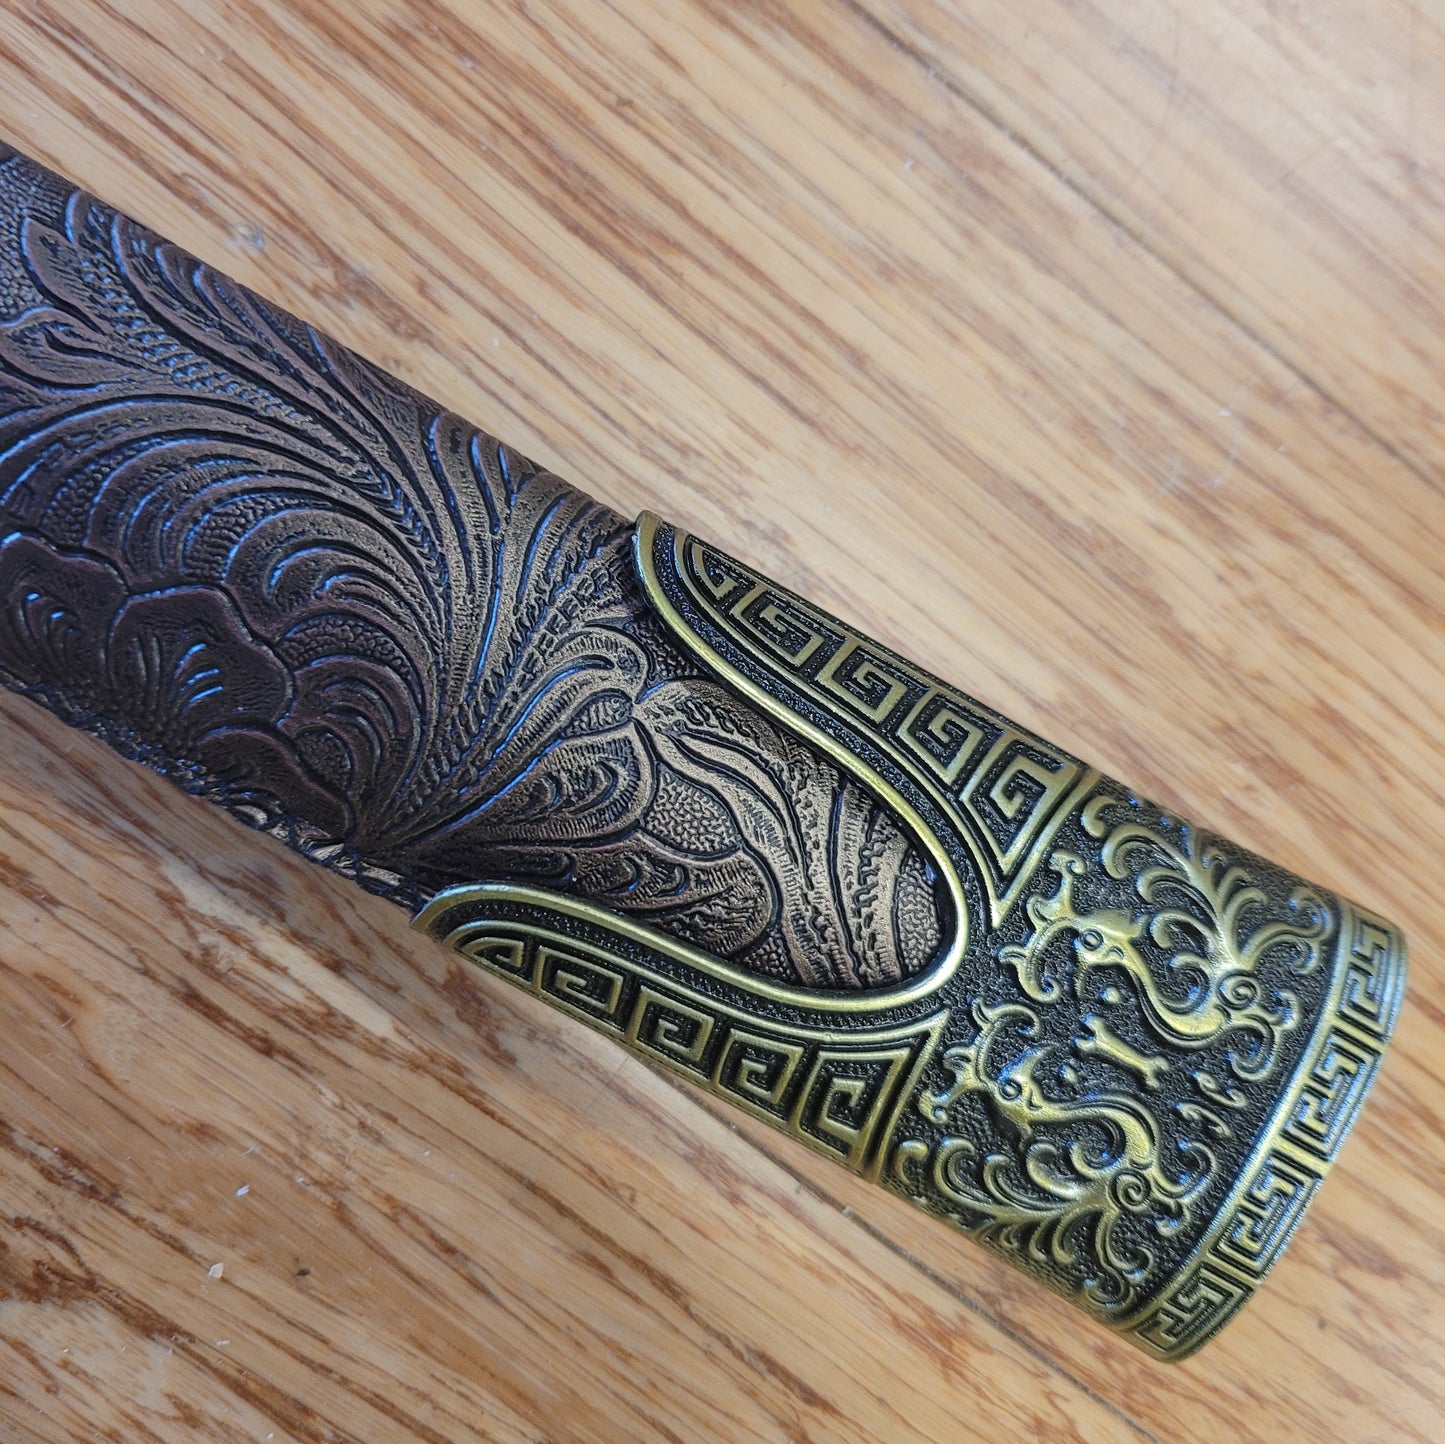 Jian - Han Dynasty Style, Textured Blade, Leather-Wrapped Scabbard